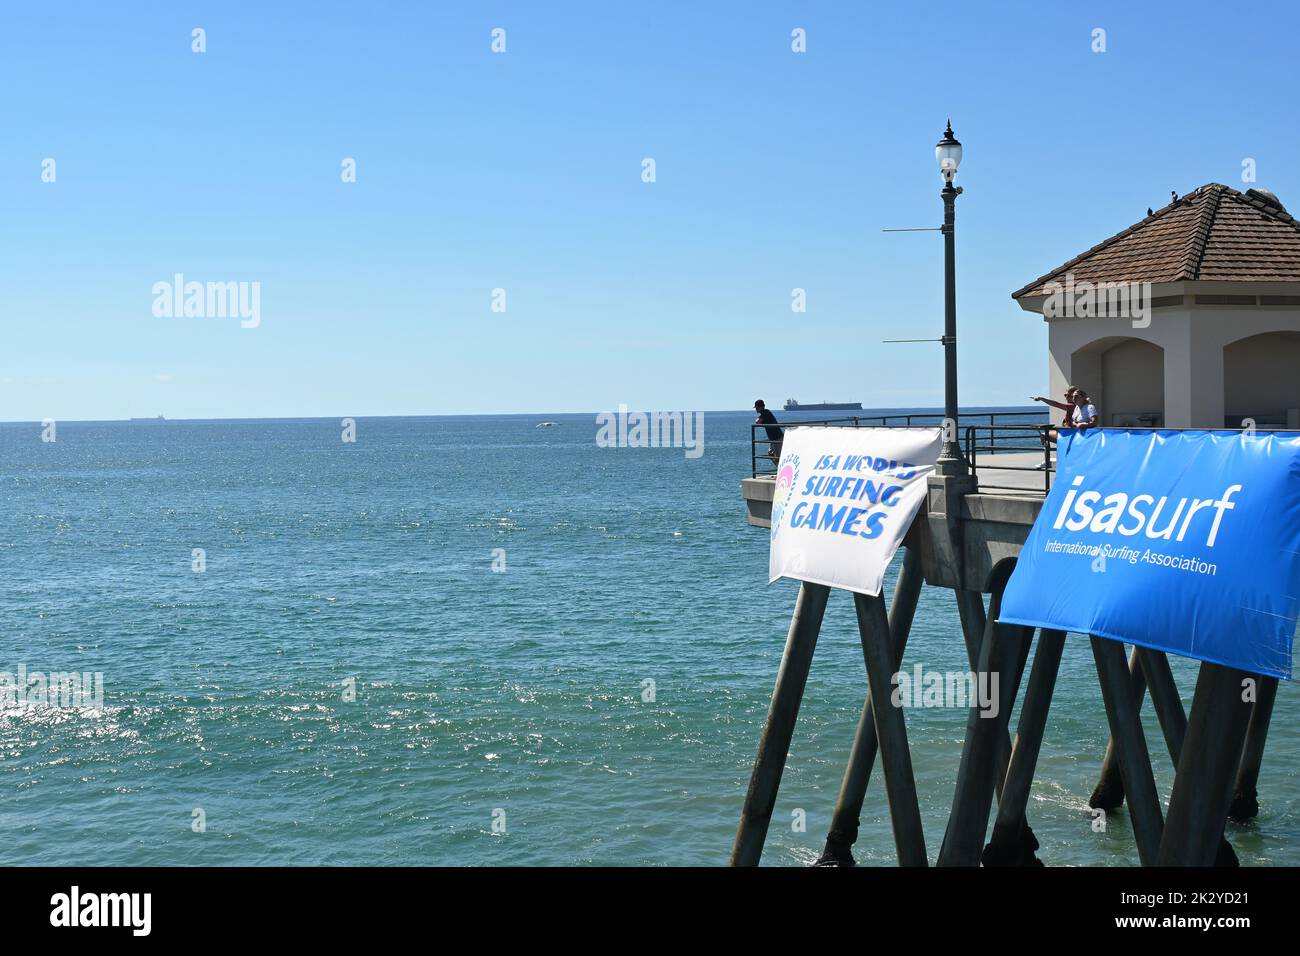 HUNTINGTON BEACH, CALIFORNIA, 19 SEPT 2022: International Surfing Association banners for the competition at the Pier in Huntington Beach. Stock Photo